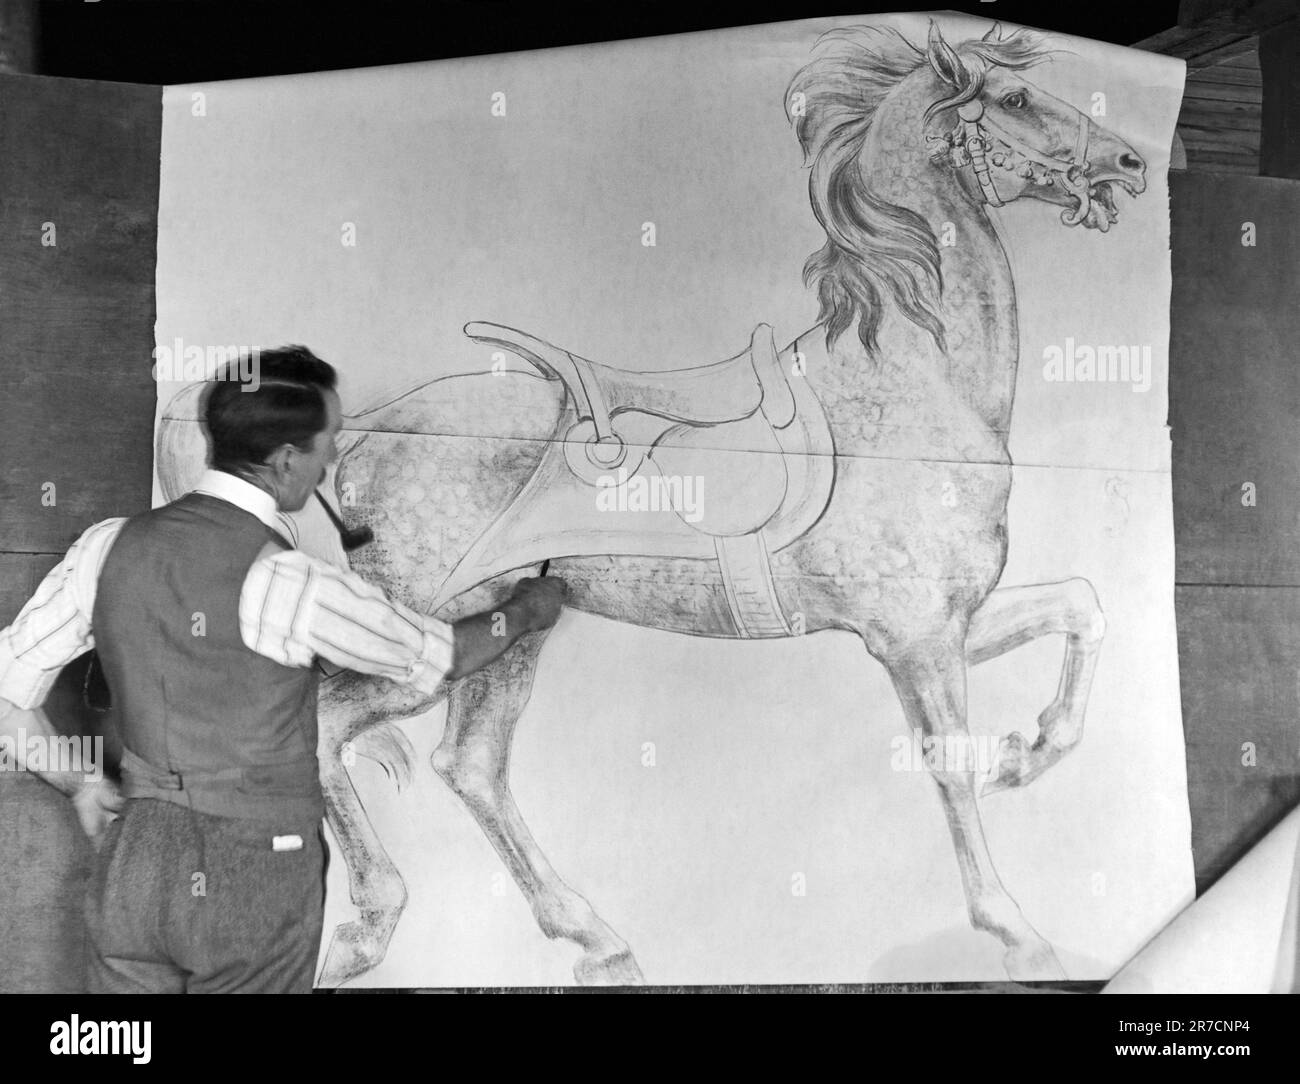 Philadelphia, Pennsylvania:  c. 1915. Designer Daniel Muller at work in a carousel animal workshop at the Dentzel Factory in the Germantown section of Philadelphia. Here he is drawing a sketch of a full size horse figure for a carousel. Stock Photo